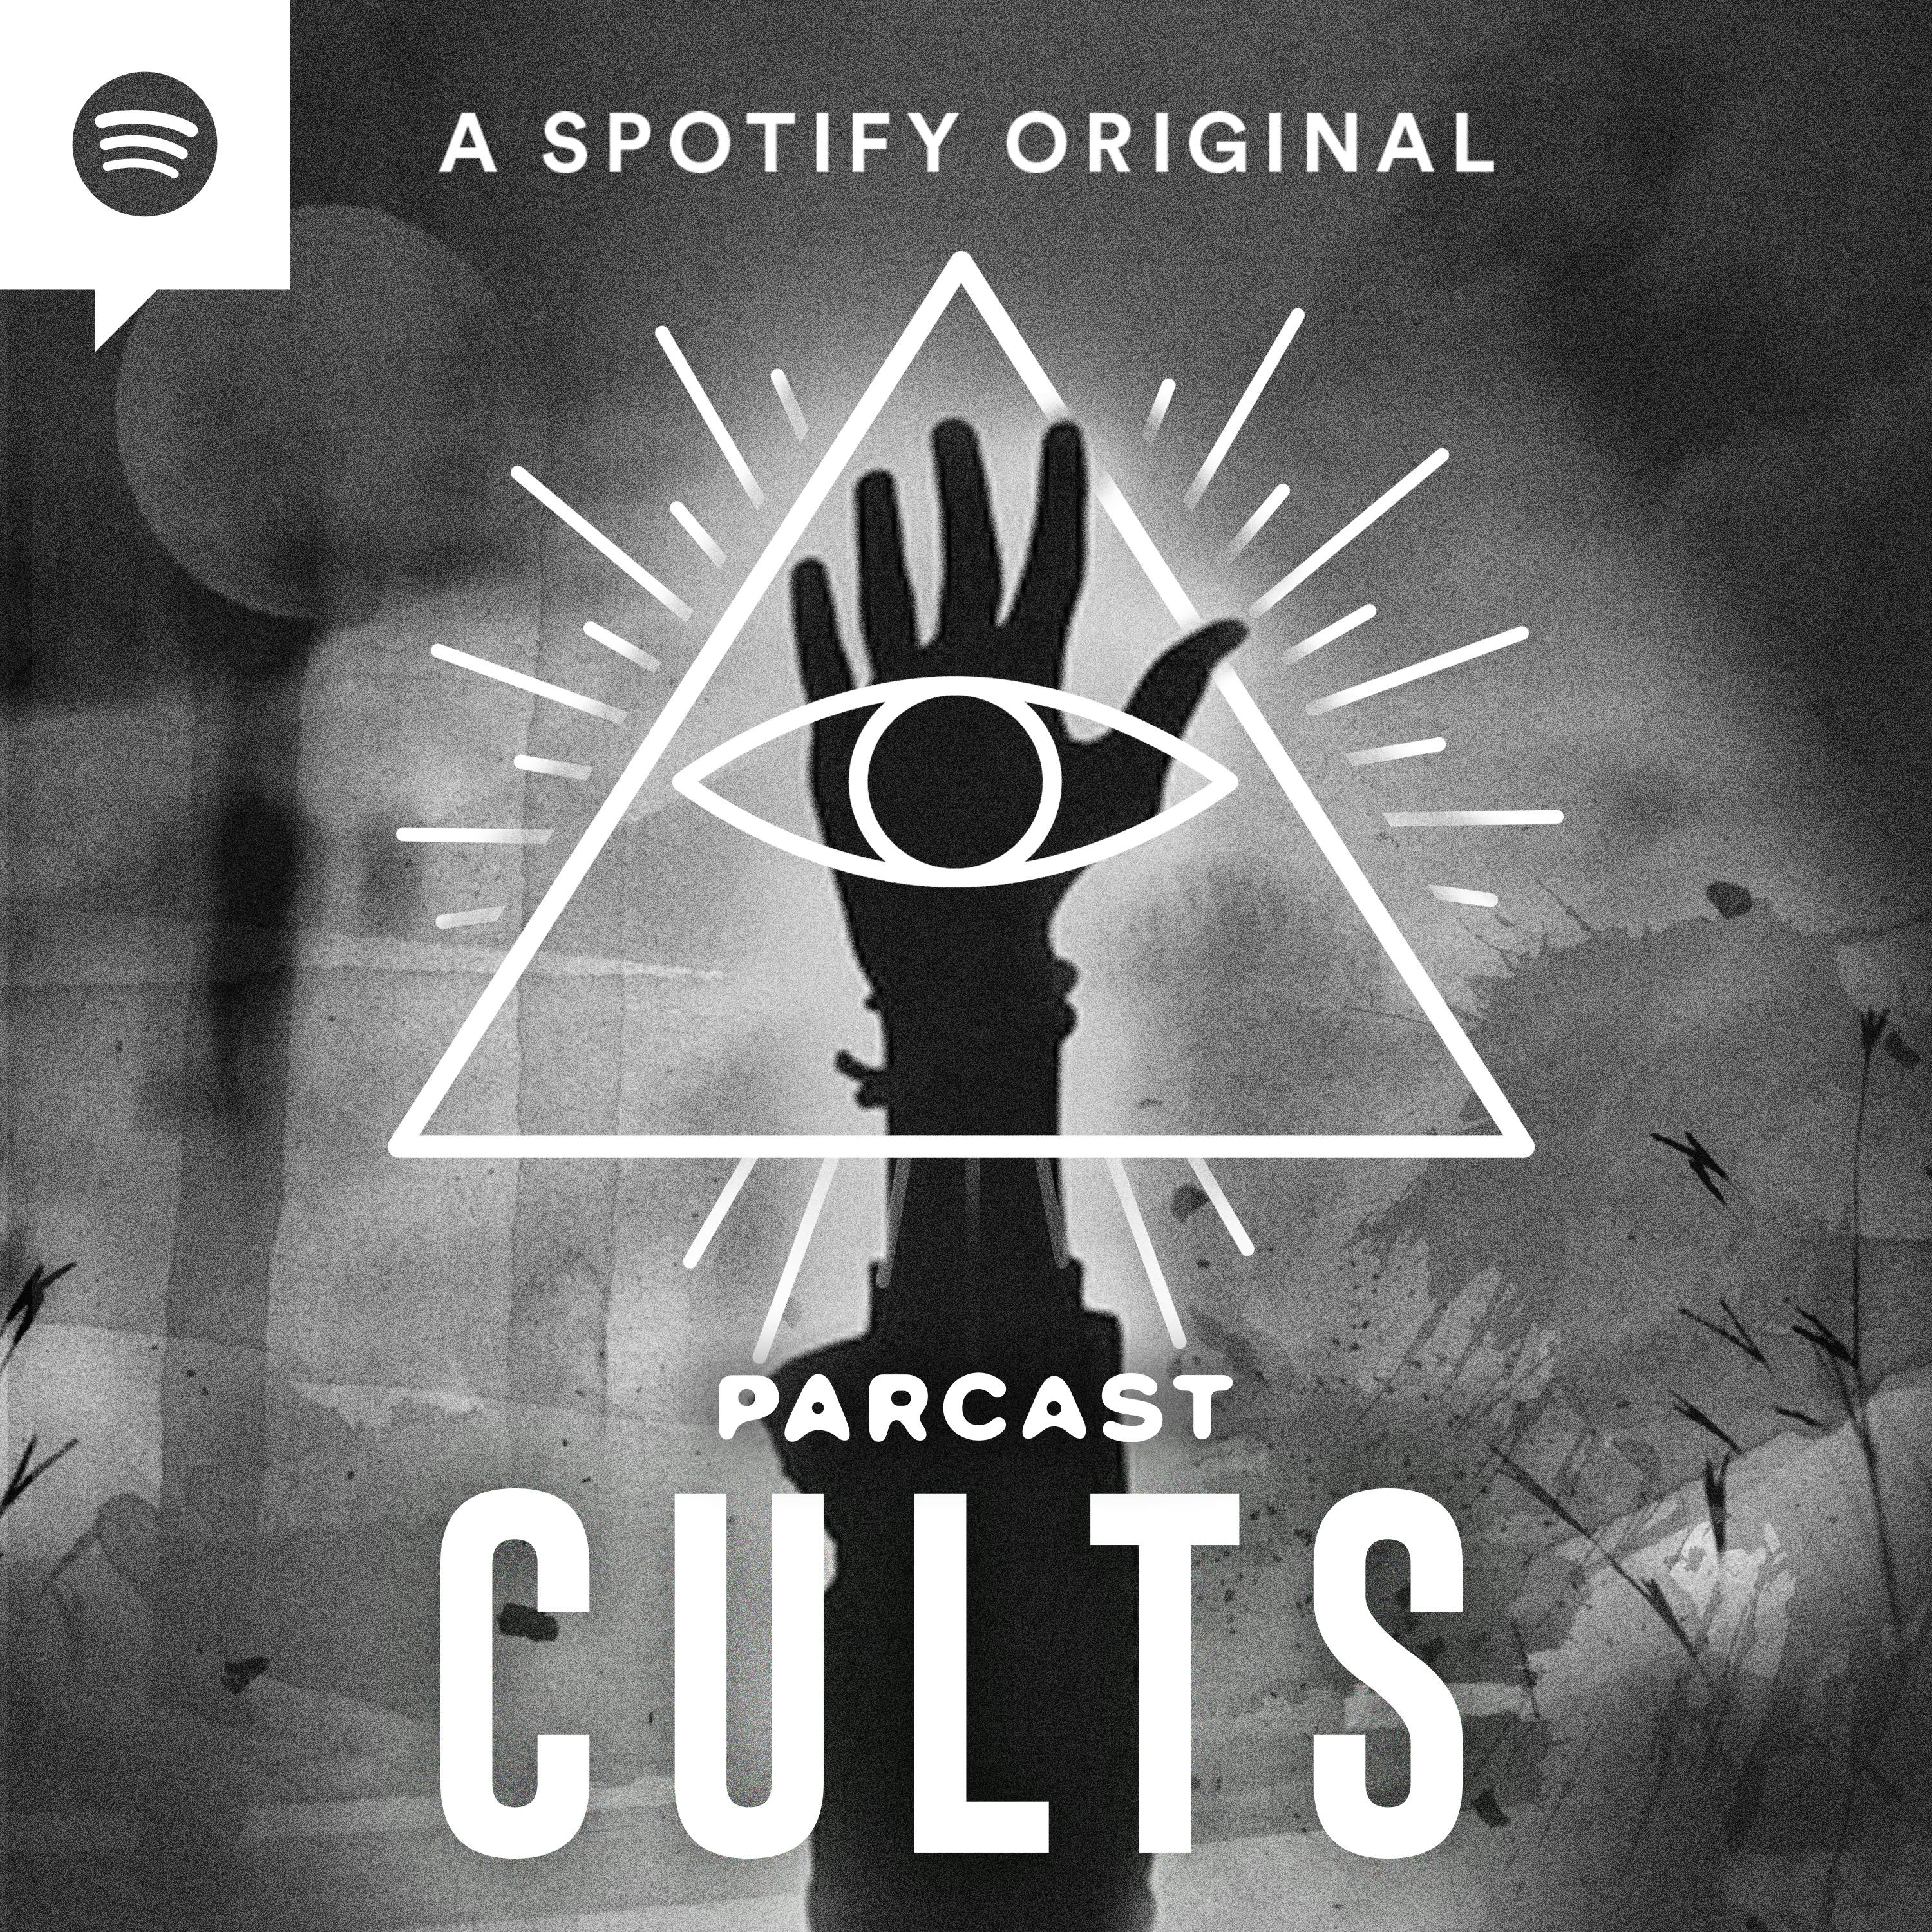 Cults podcast